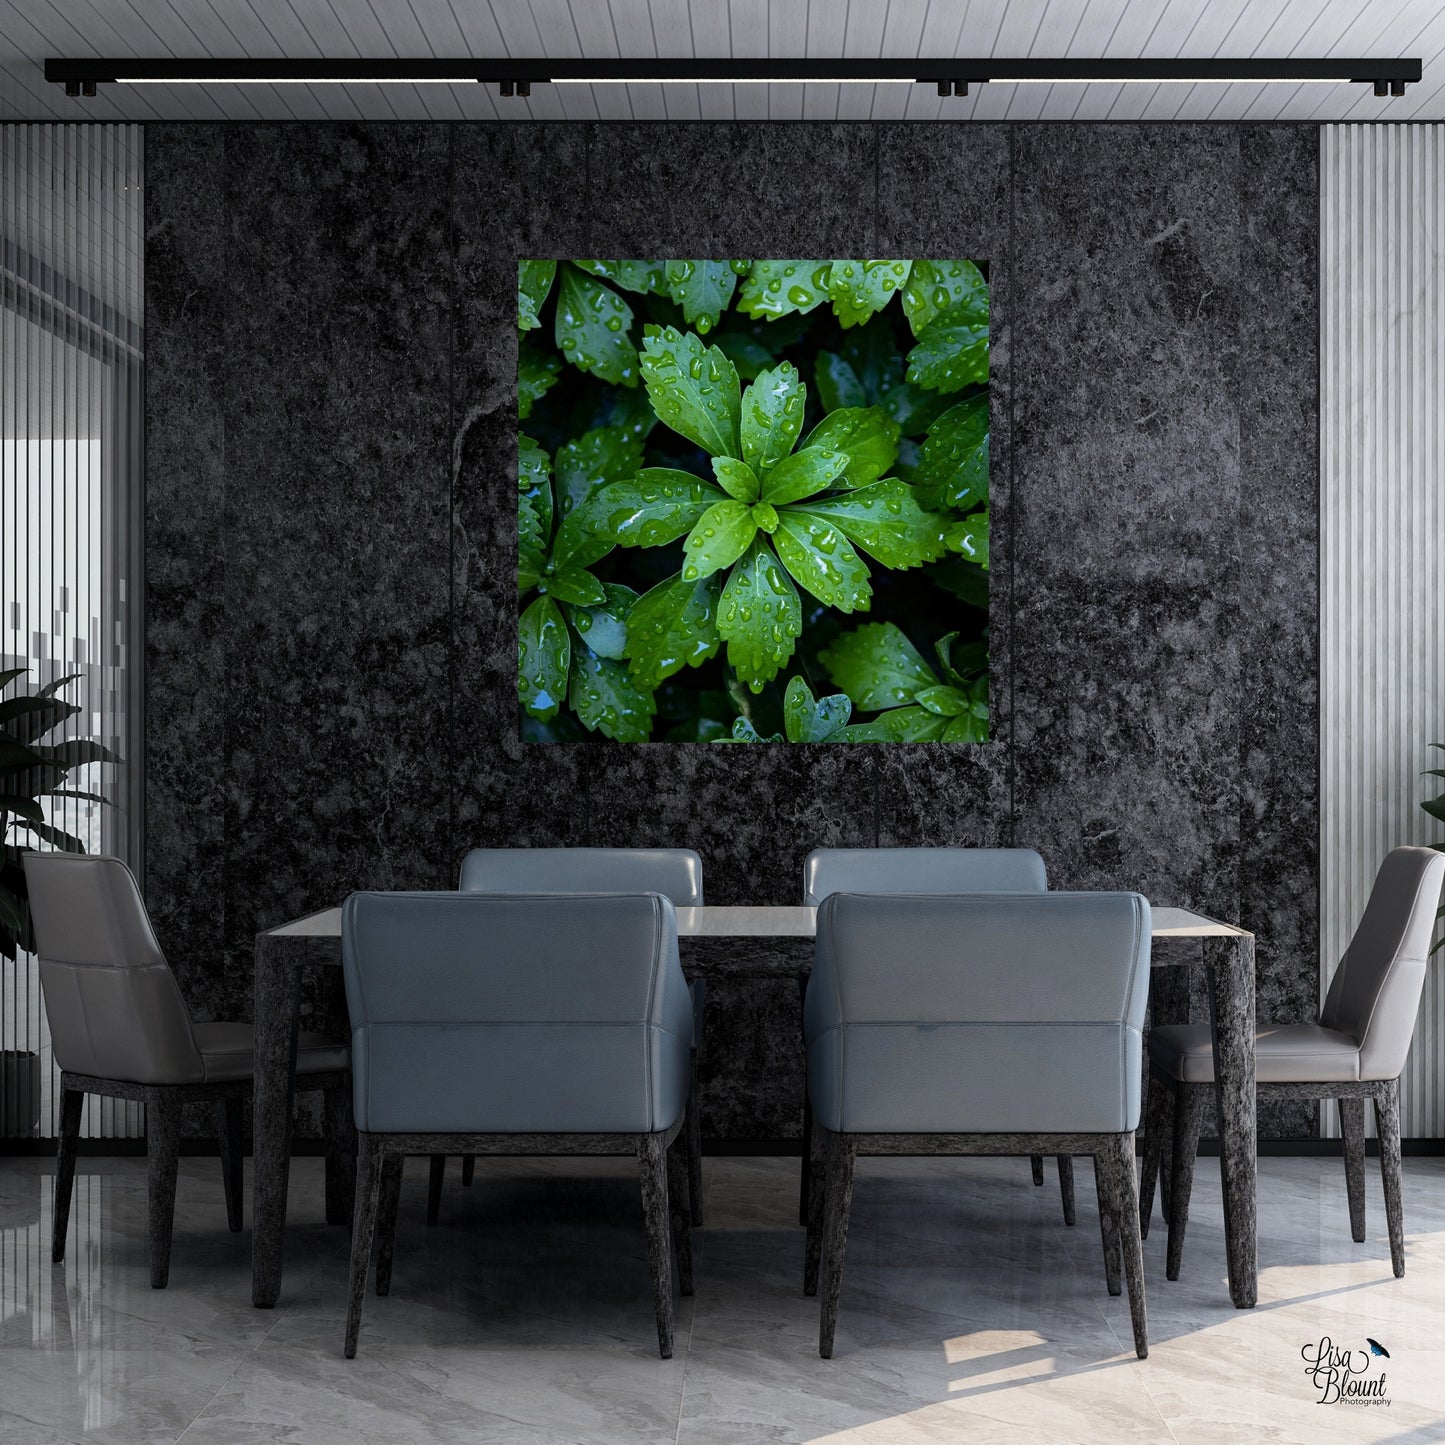 bright green art of leaves with raindrops as the focal point on dark gray conference room wall